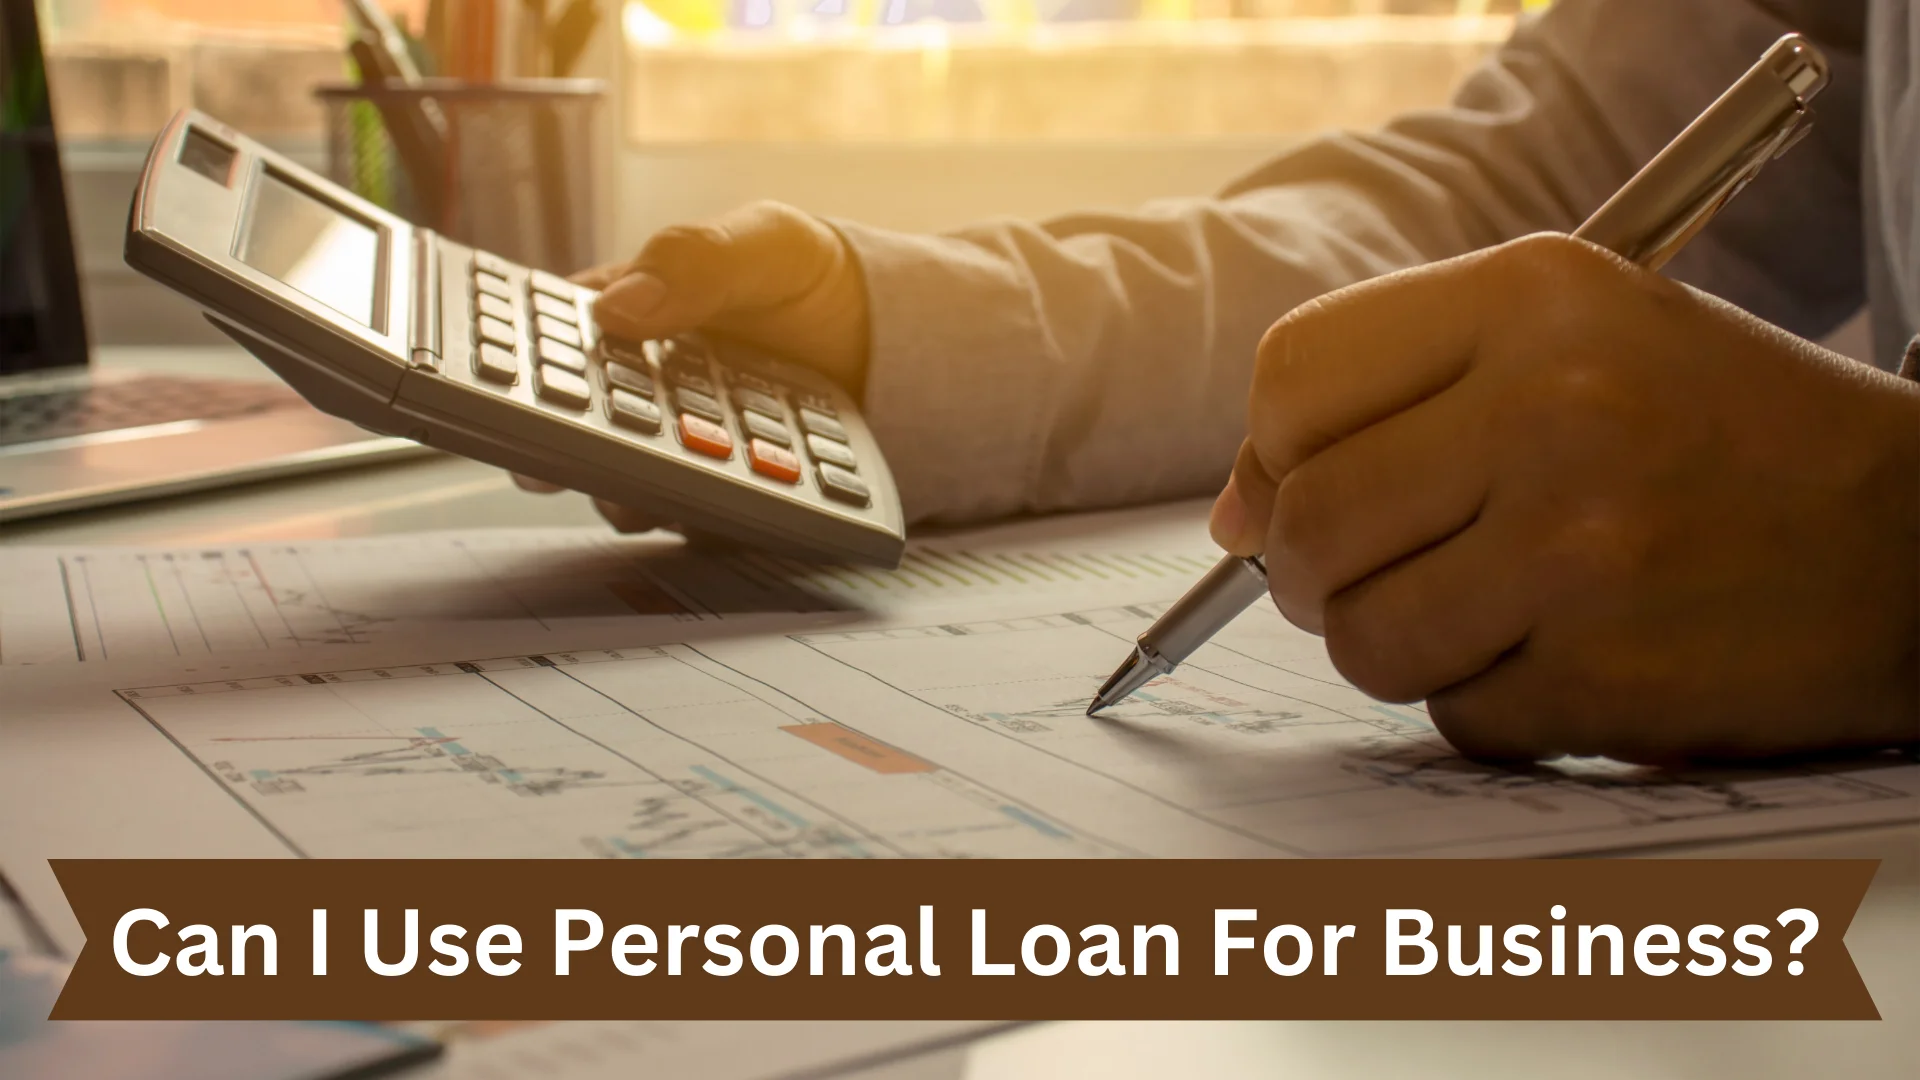 Using Personal Loans for Business: What You Need to Know